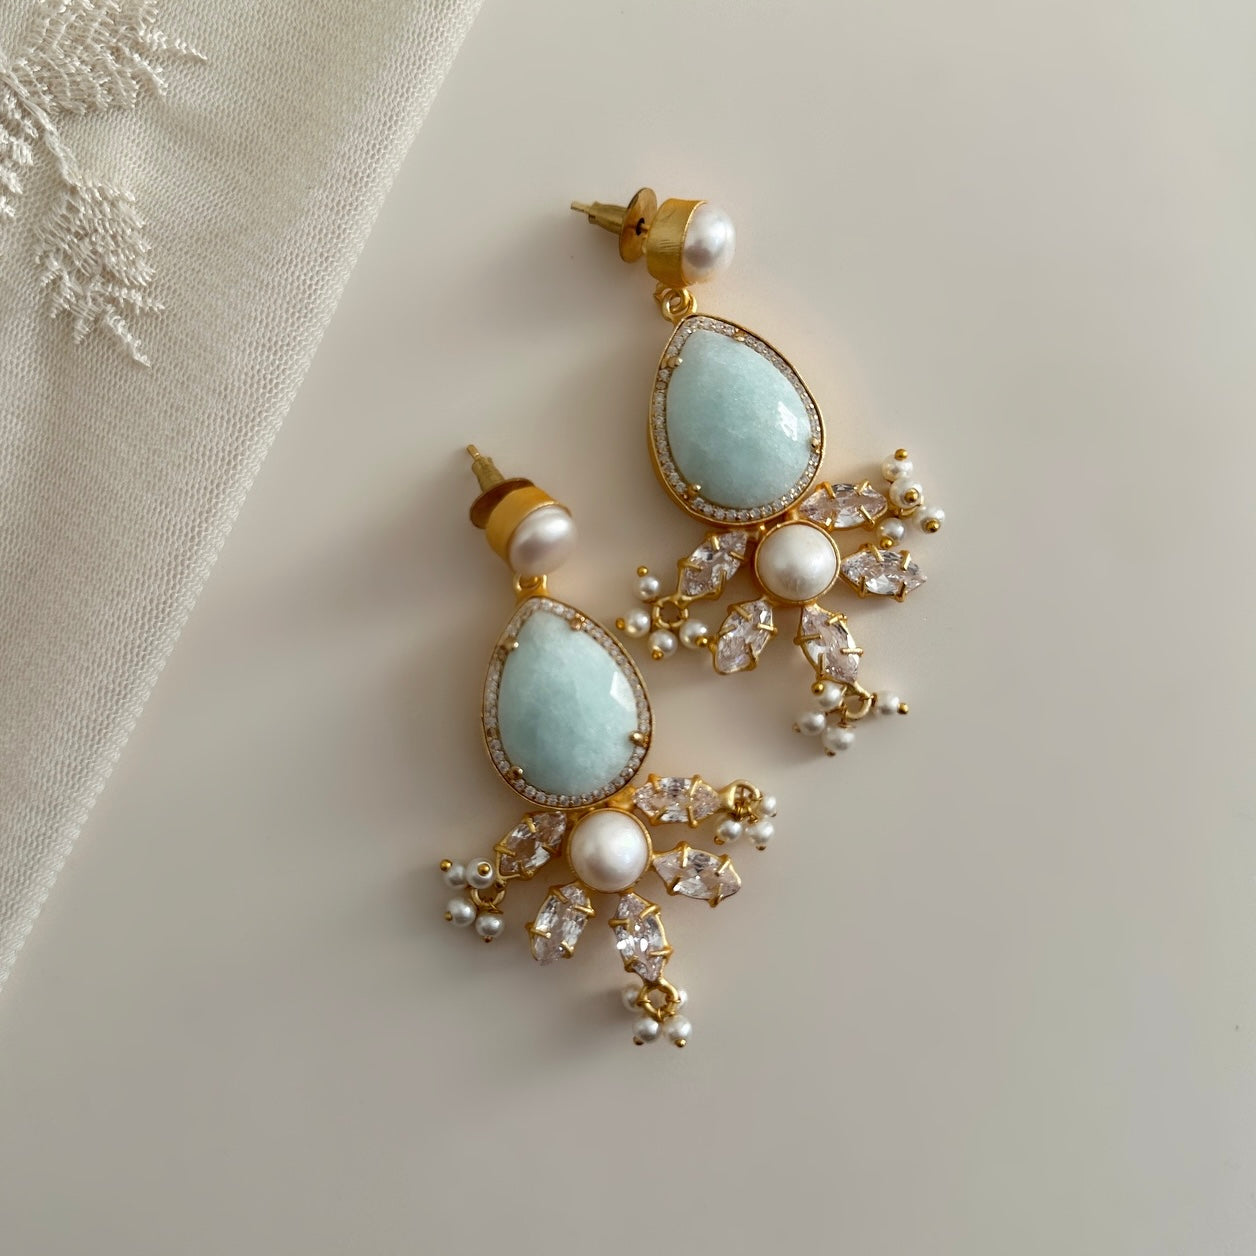 Enhance your look with the elegant hues of jade and pearl in these Simone Crystal Drop Earrings. Featuring luscious CZ crystals, these earrings will add a touch of sophistication and glamour to any outfit. Elevate your style and make a statement with these stunning earrings.